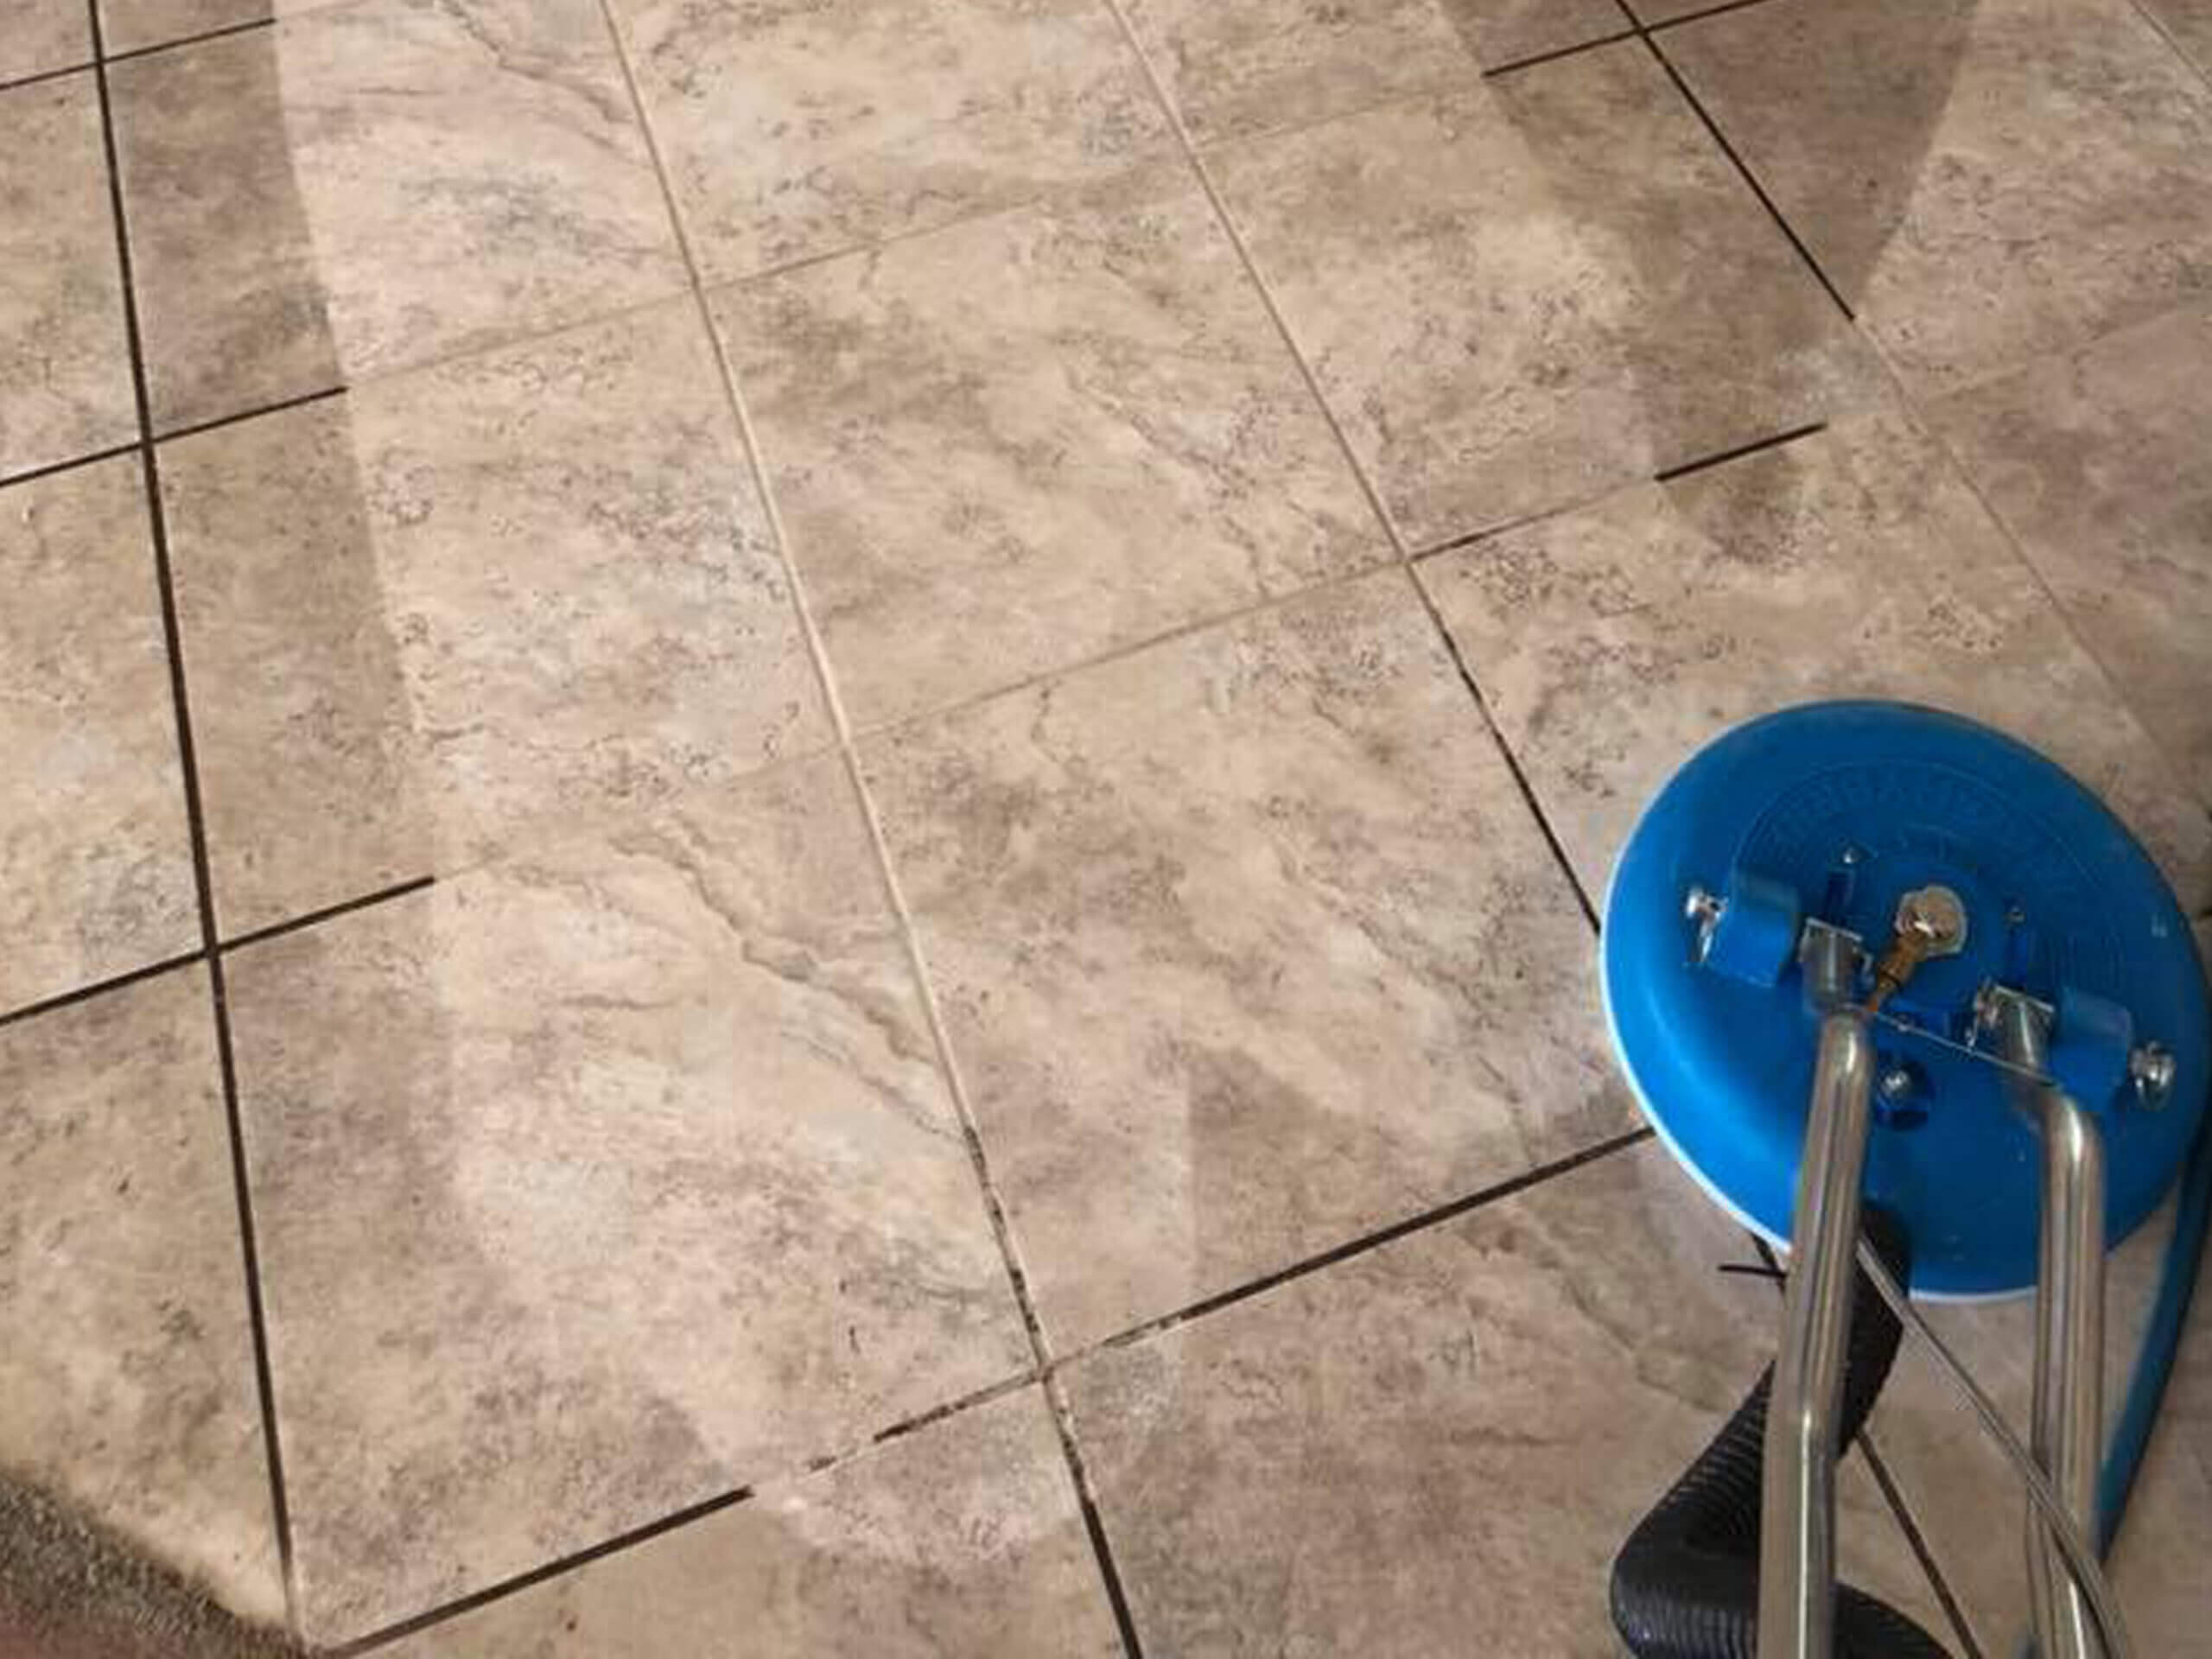 Grout & Tile Cleaning Service